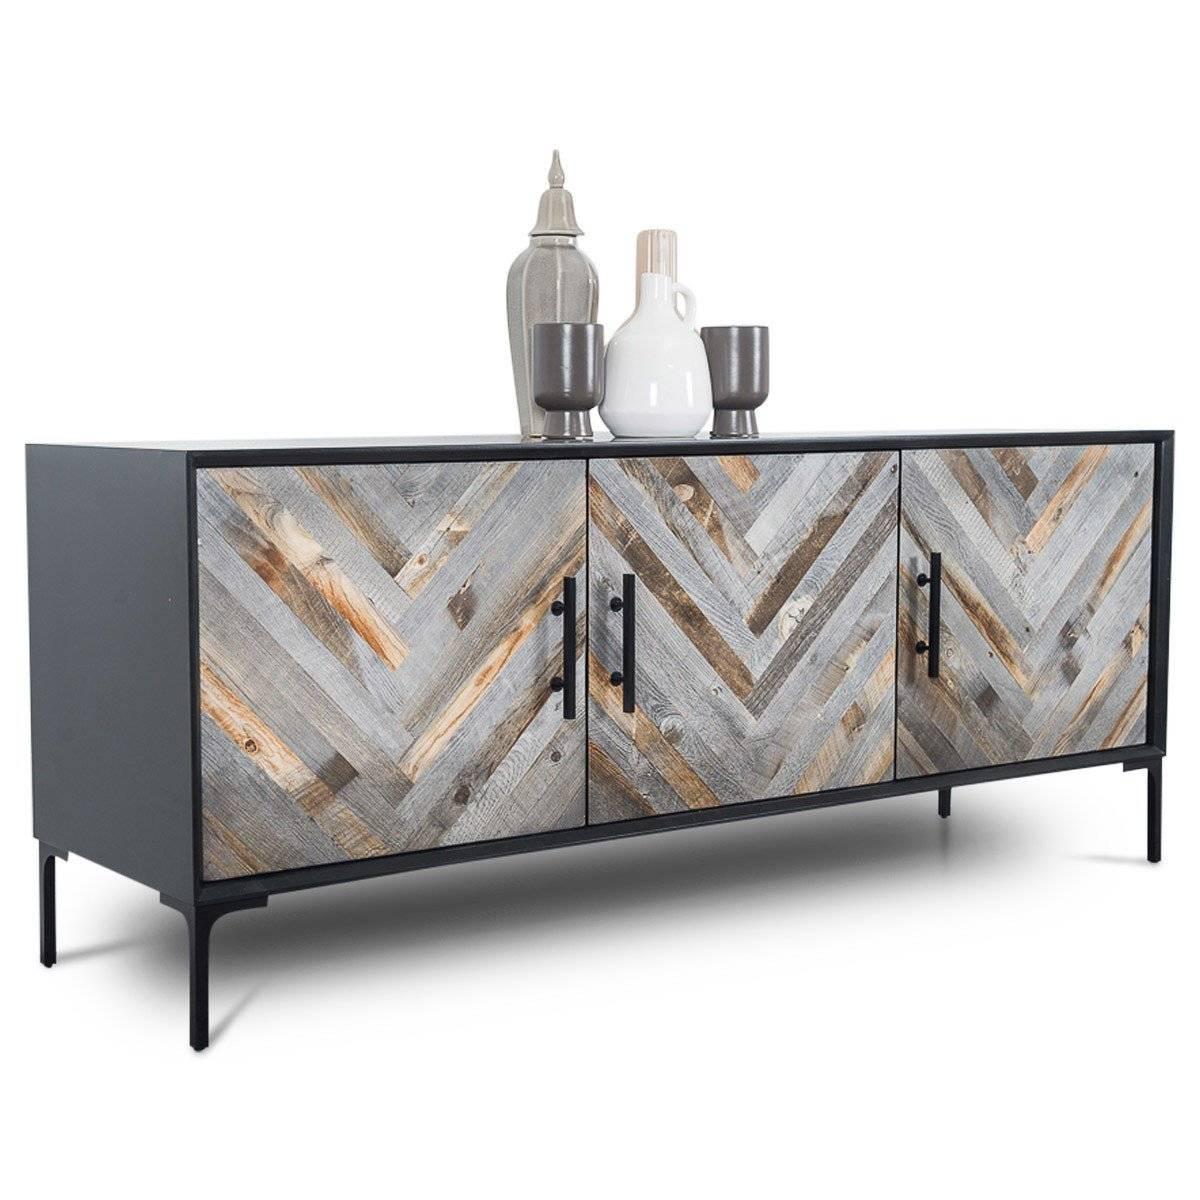 The Amalfi three-door credenza with recycled wood door fronts is perfect for any spaces, with recycled wood doors. Surrounded by a matte black or white finish, the wood pieces placed on the doors create a large herringbone effect. 

Dimensions:
72